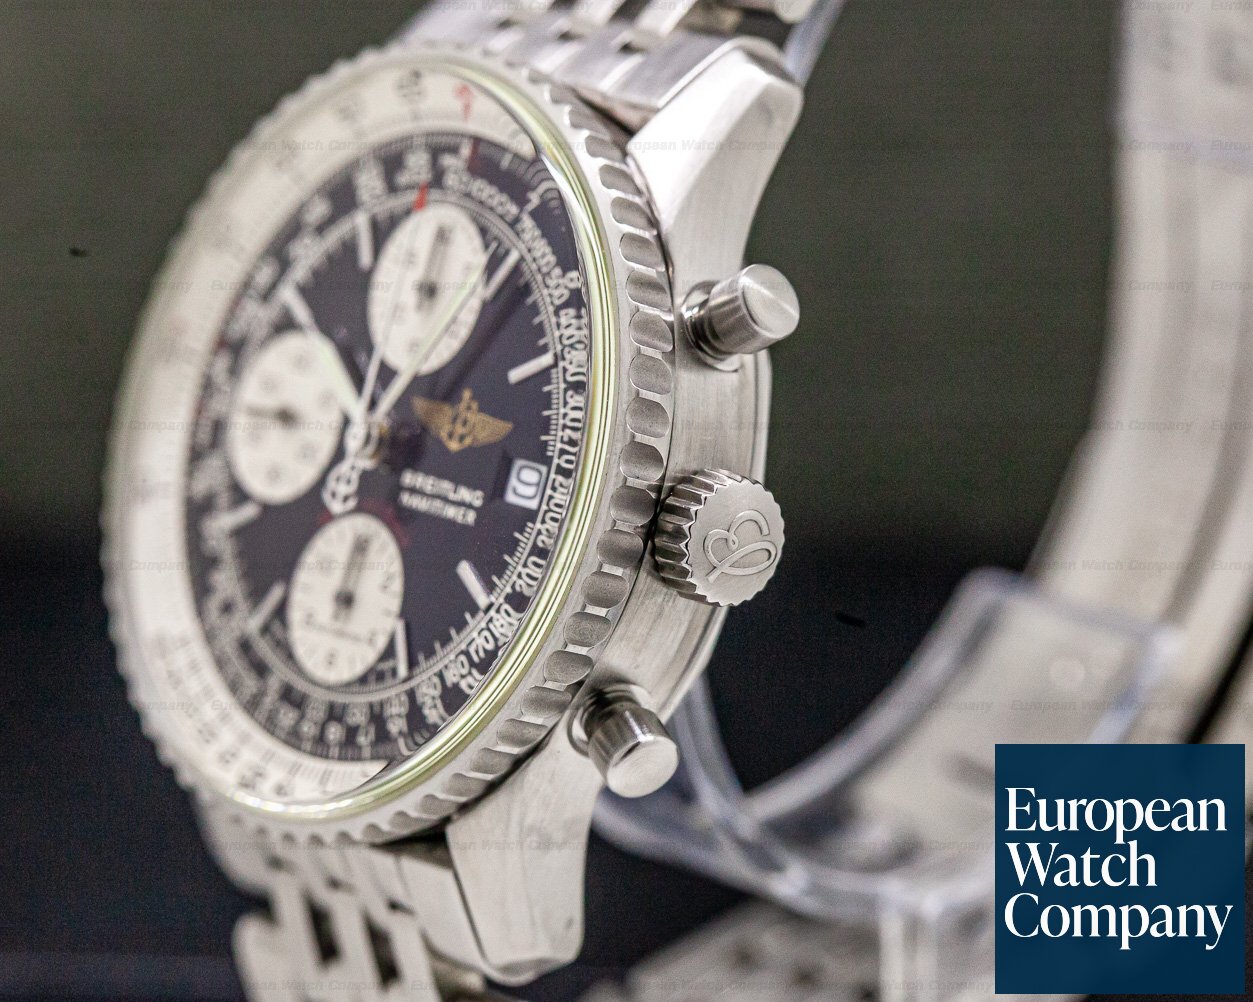 Breitling Navitimer Breitling Fighters Automatic Chronograph SS Ref. A13330